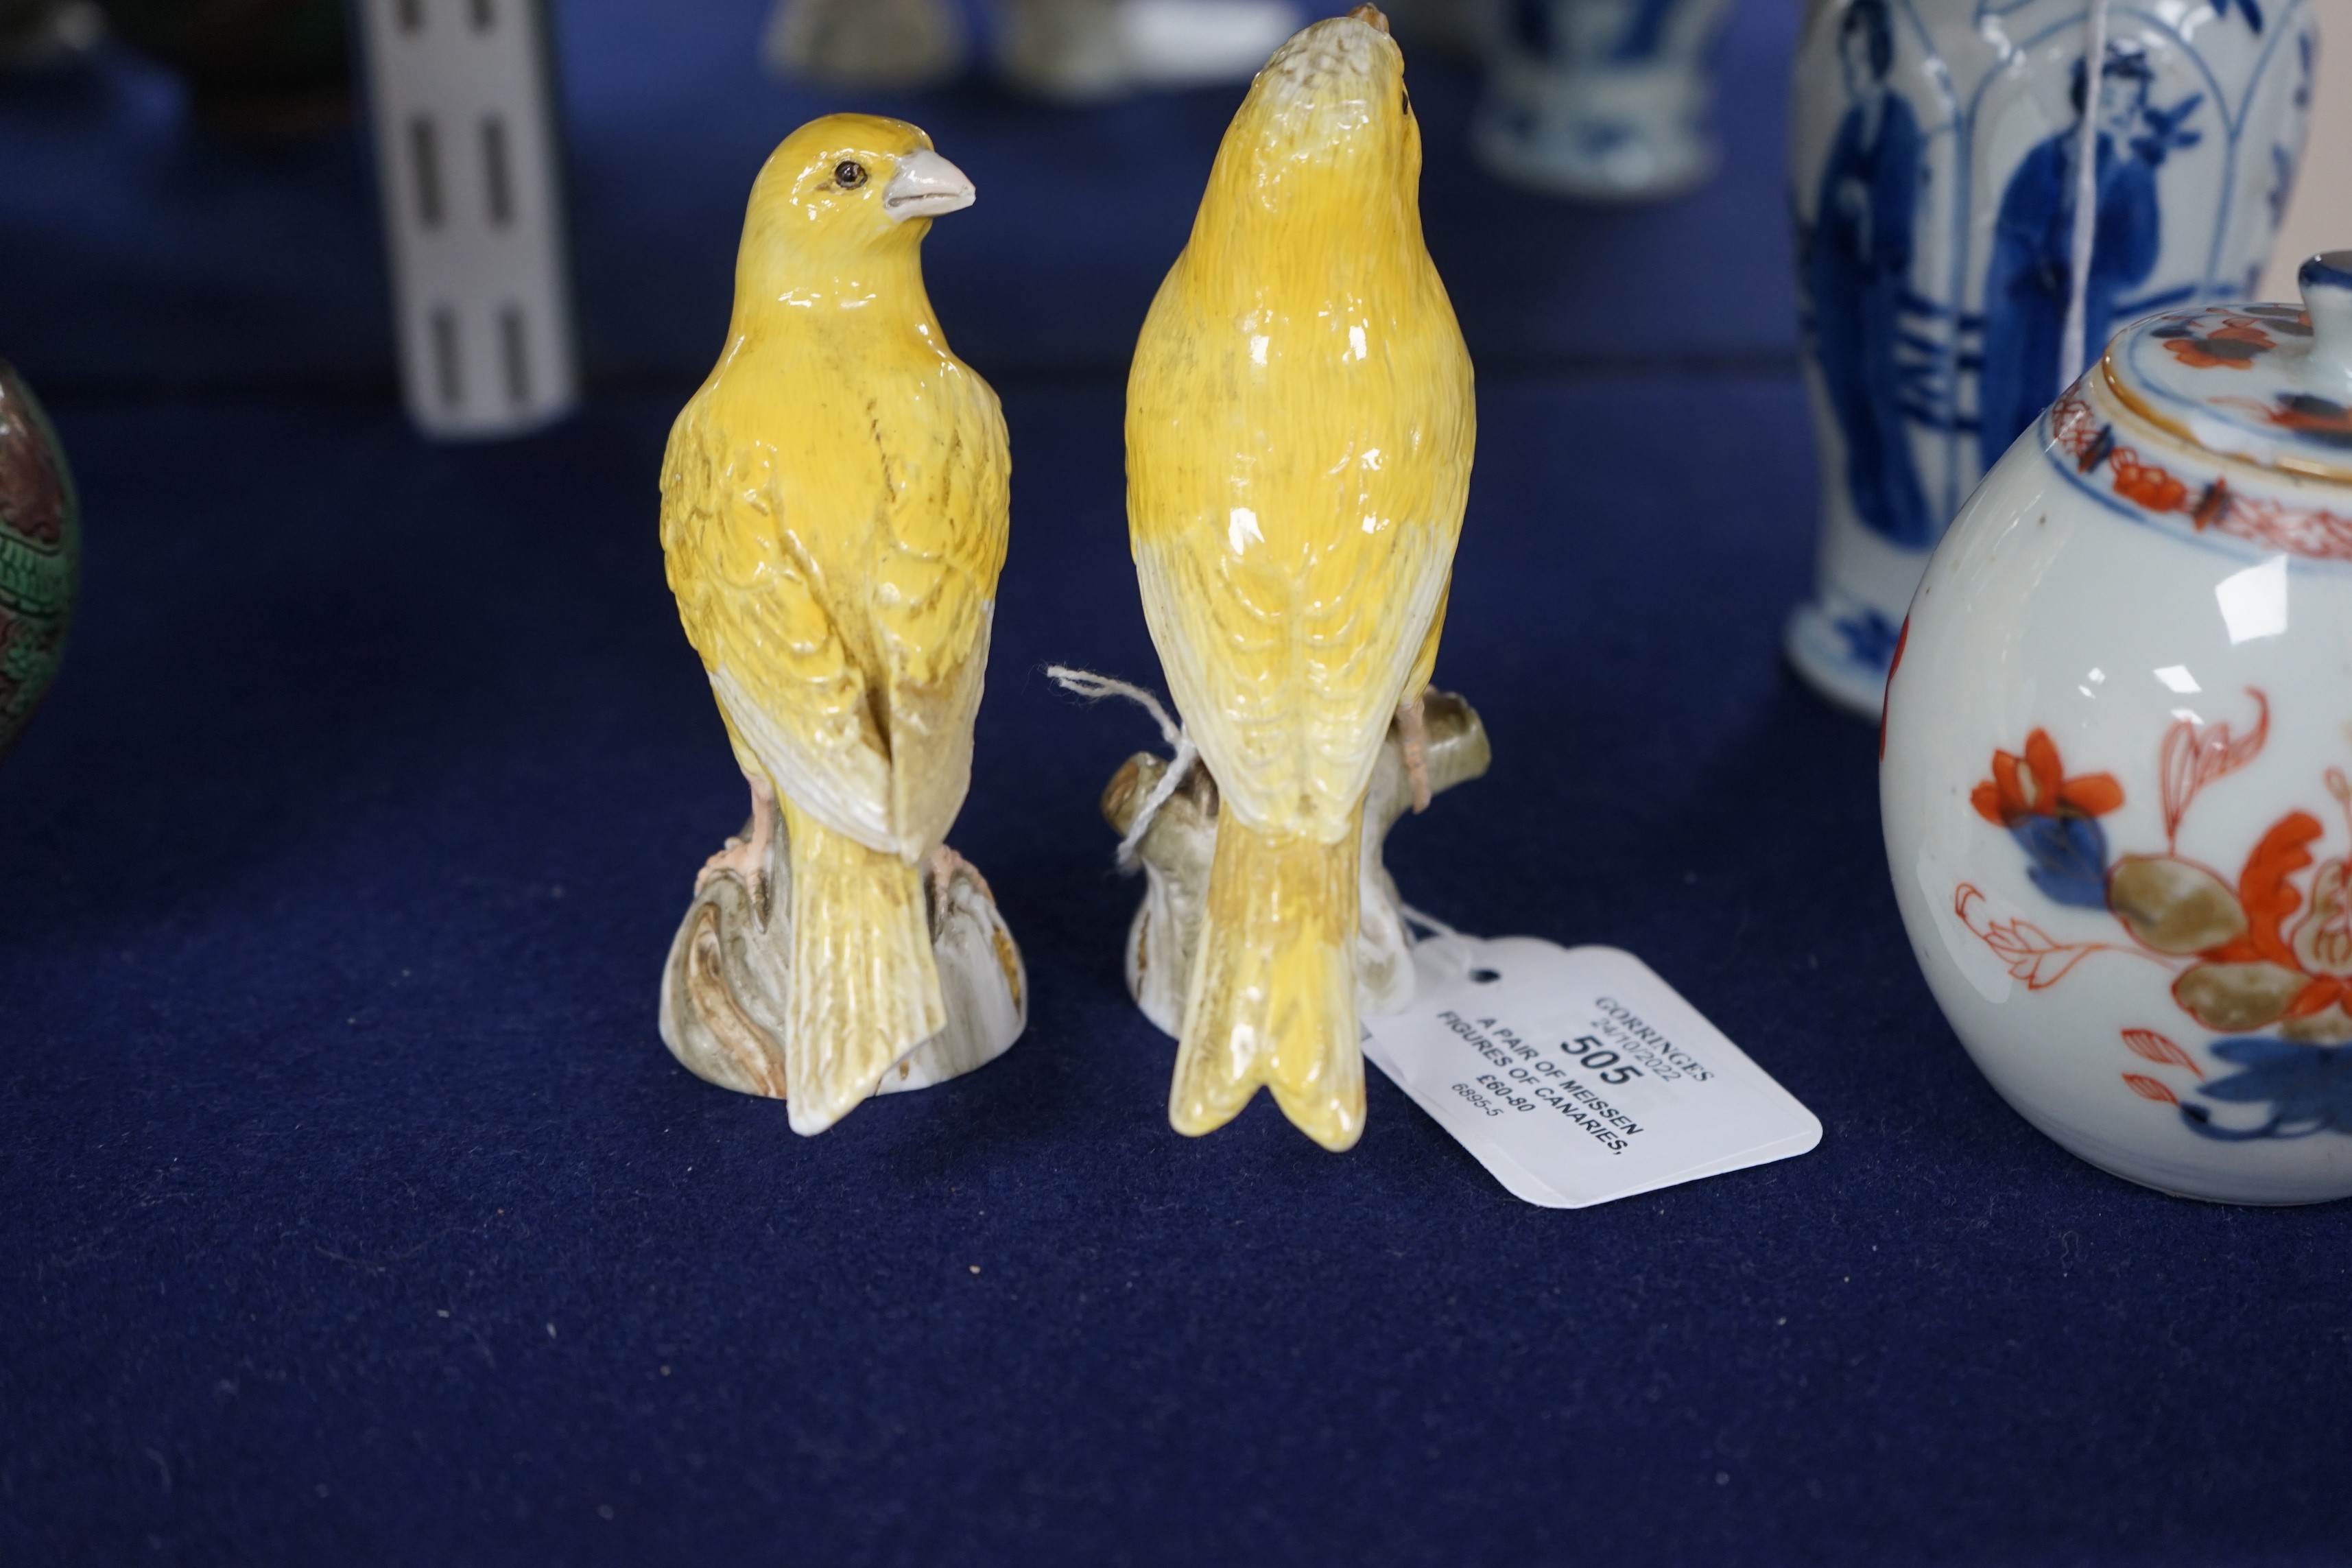 A pair of Meissen figures of canaries, 10cm tall